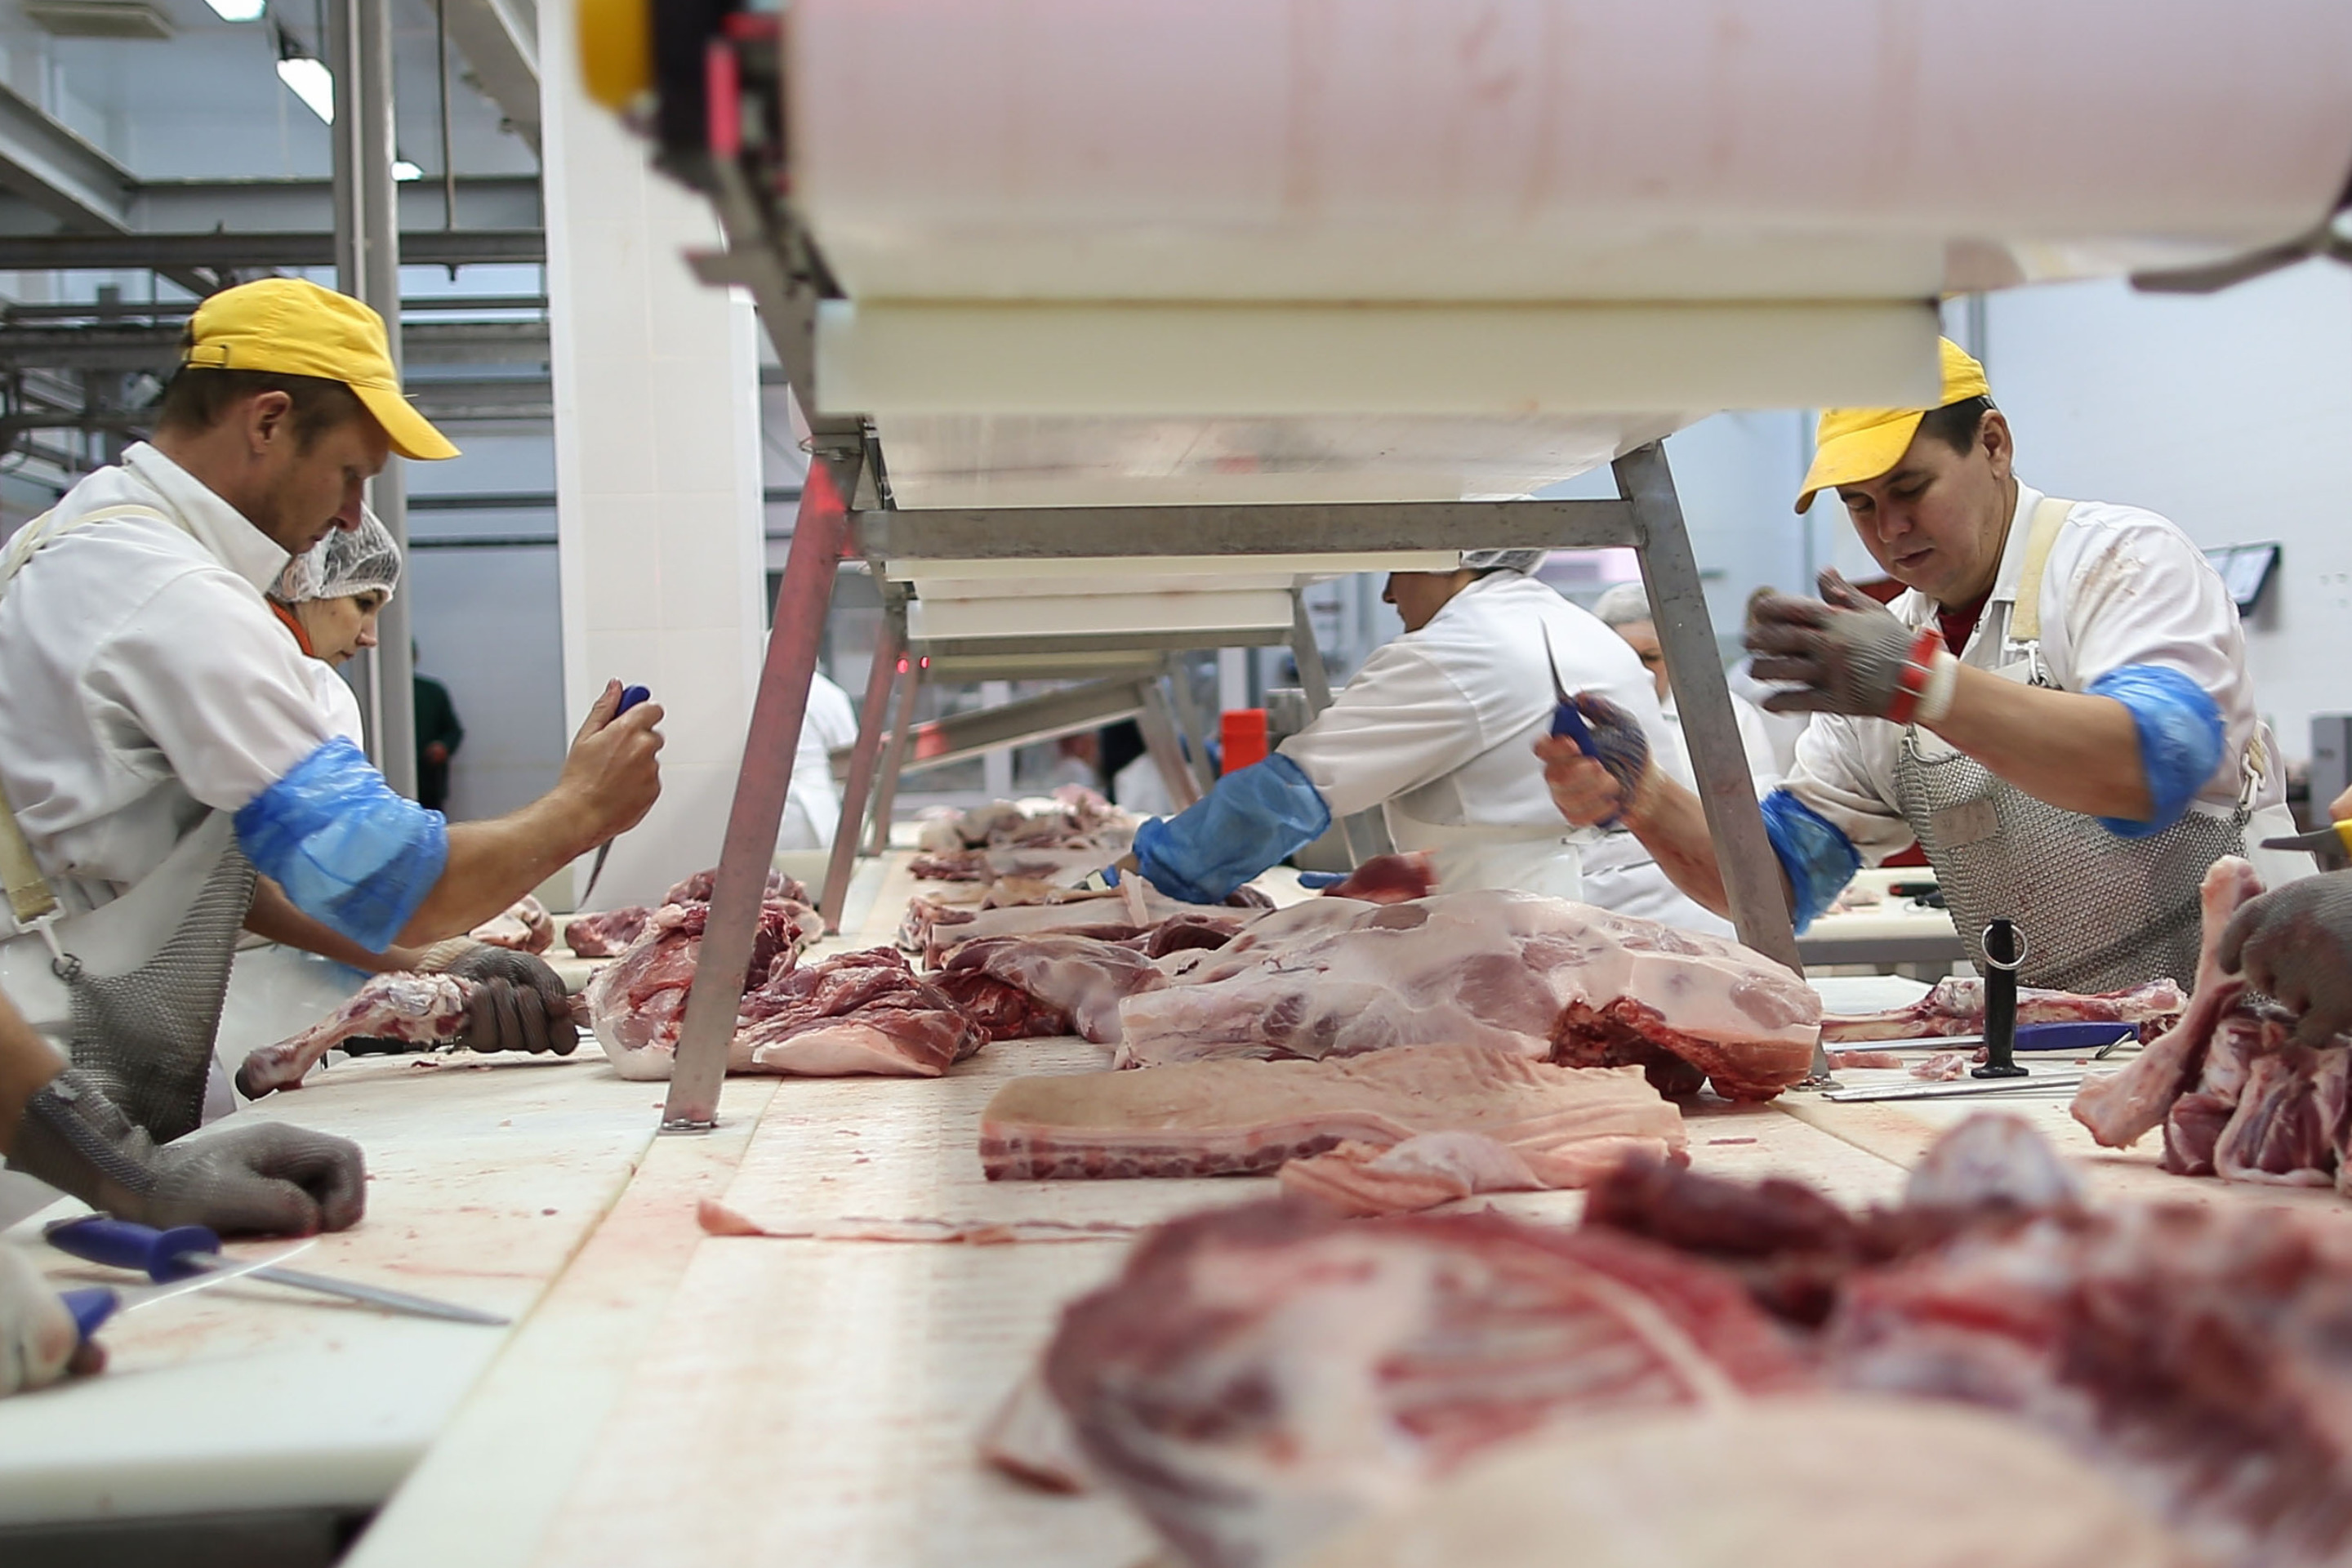 A cutting department at the Kuban meat-processing plant in the Krasnodar Territory